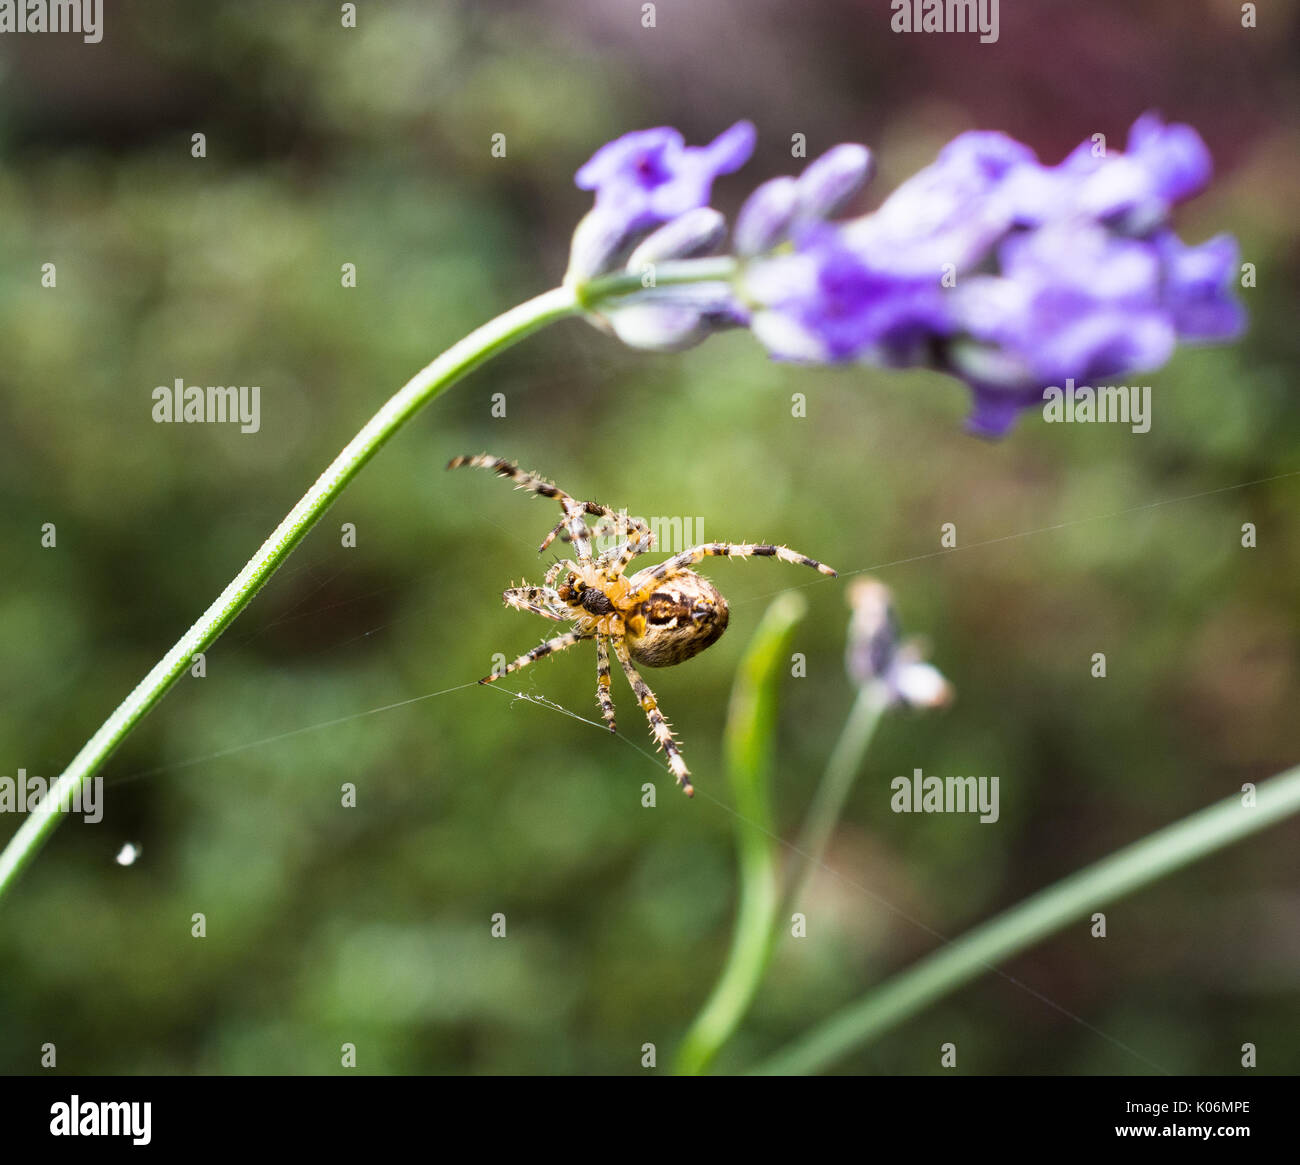 Close up of a spider making a web Stock Photo